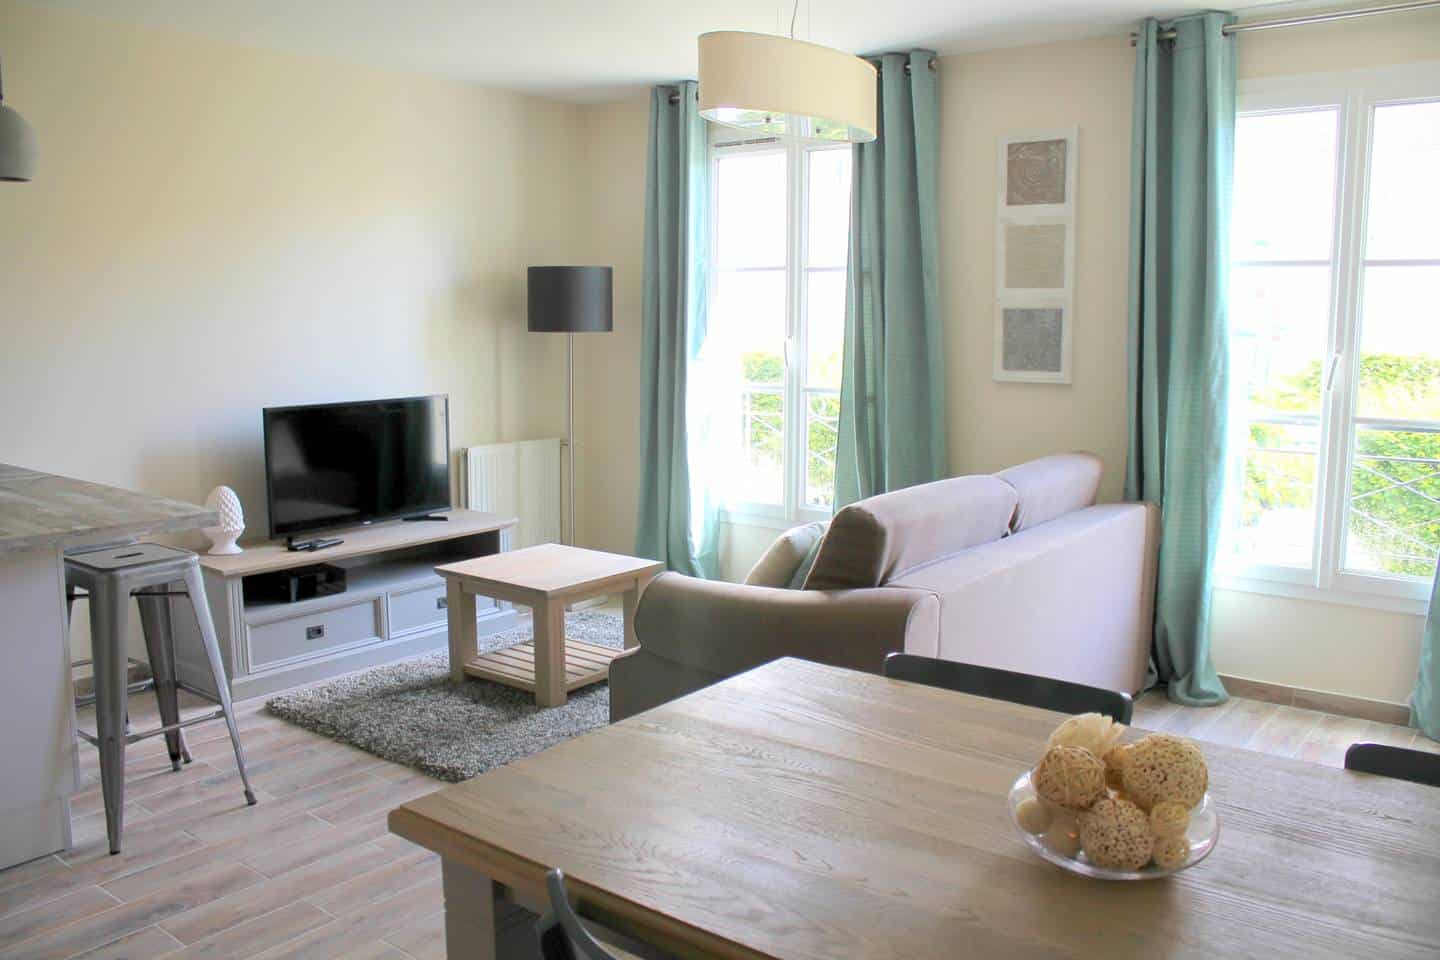 Check out this fantastic budget Airbnb in Serris